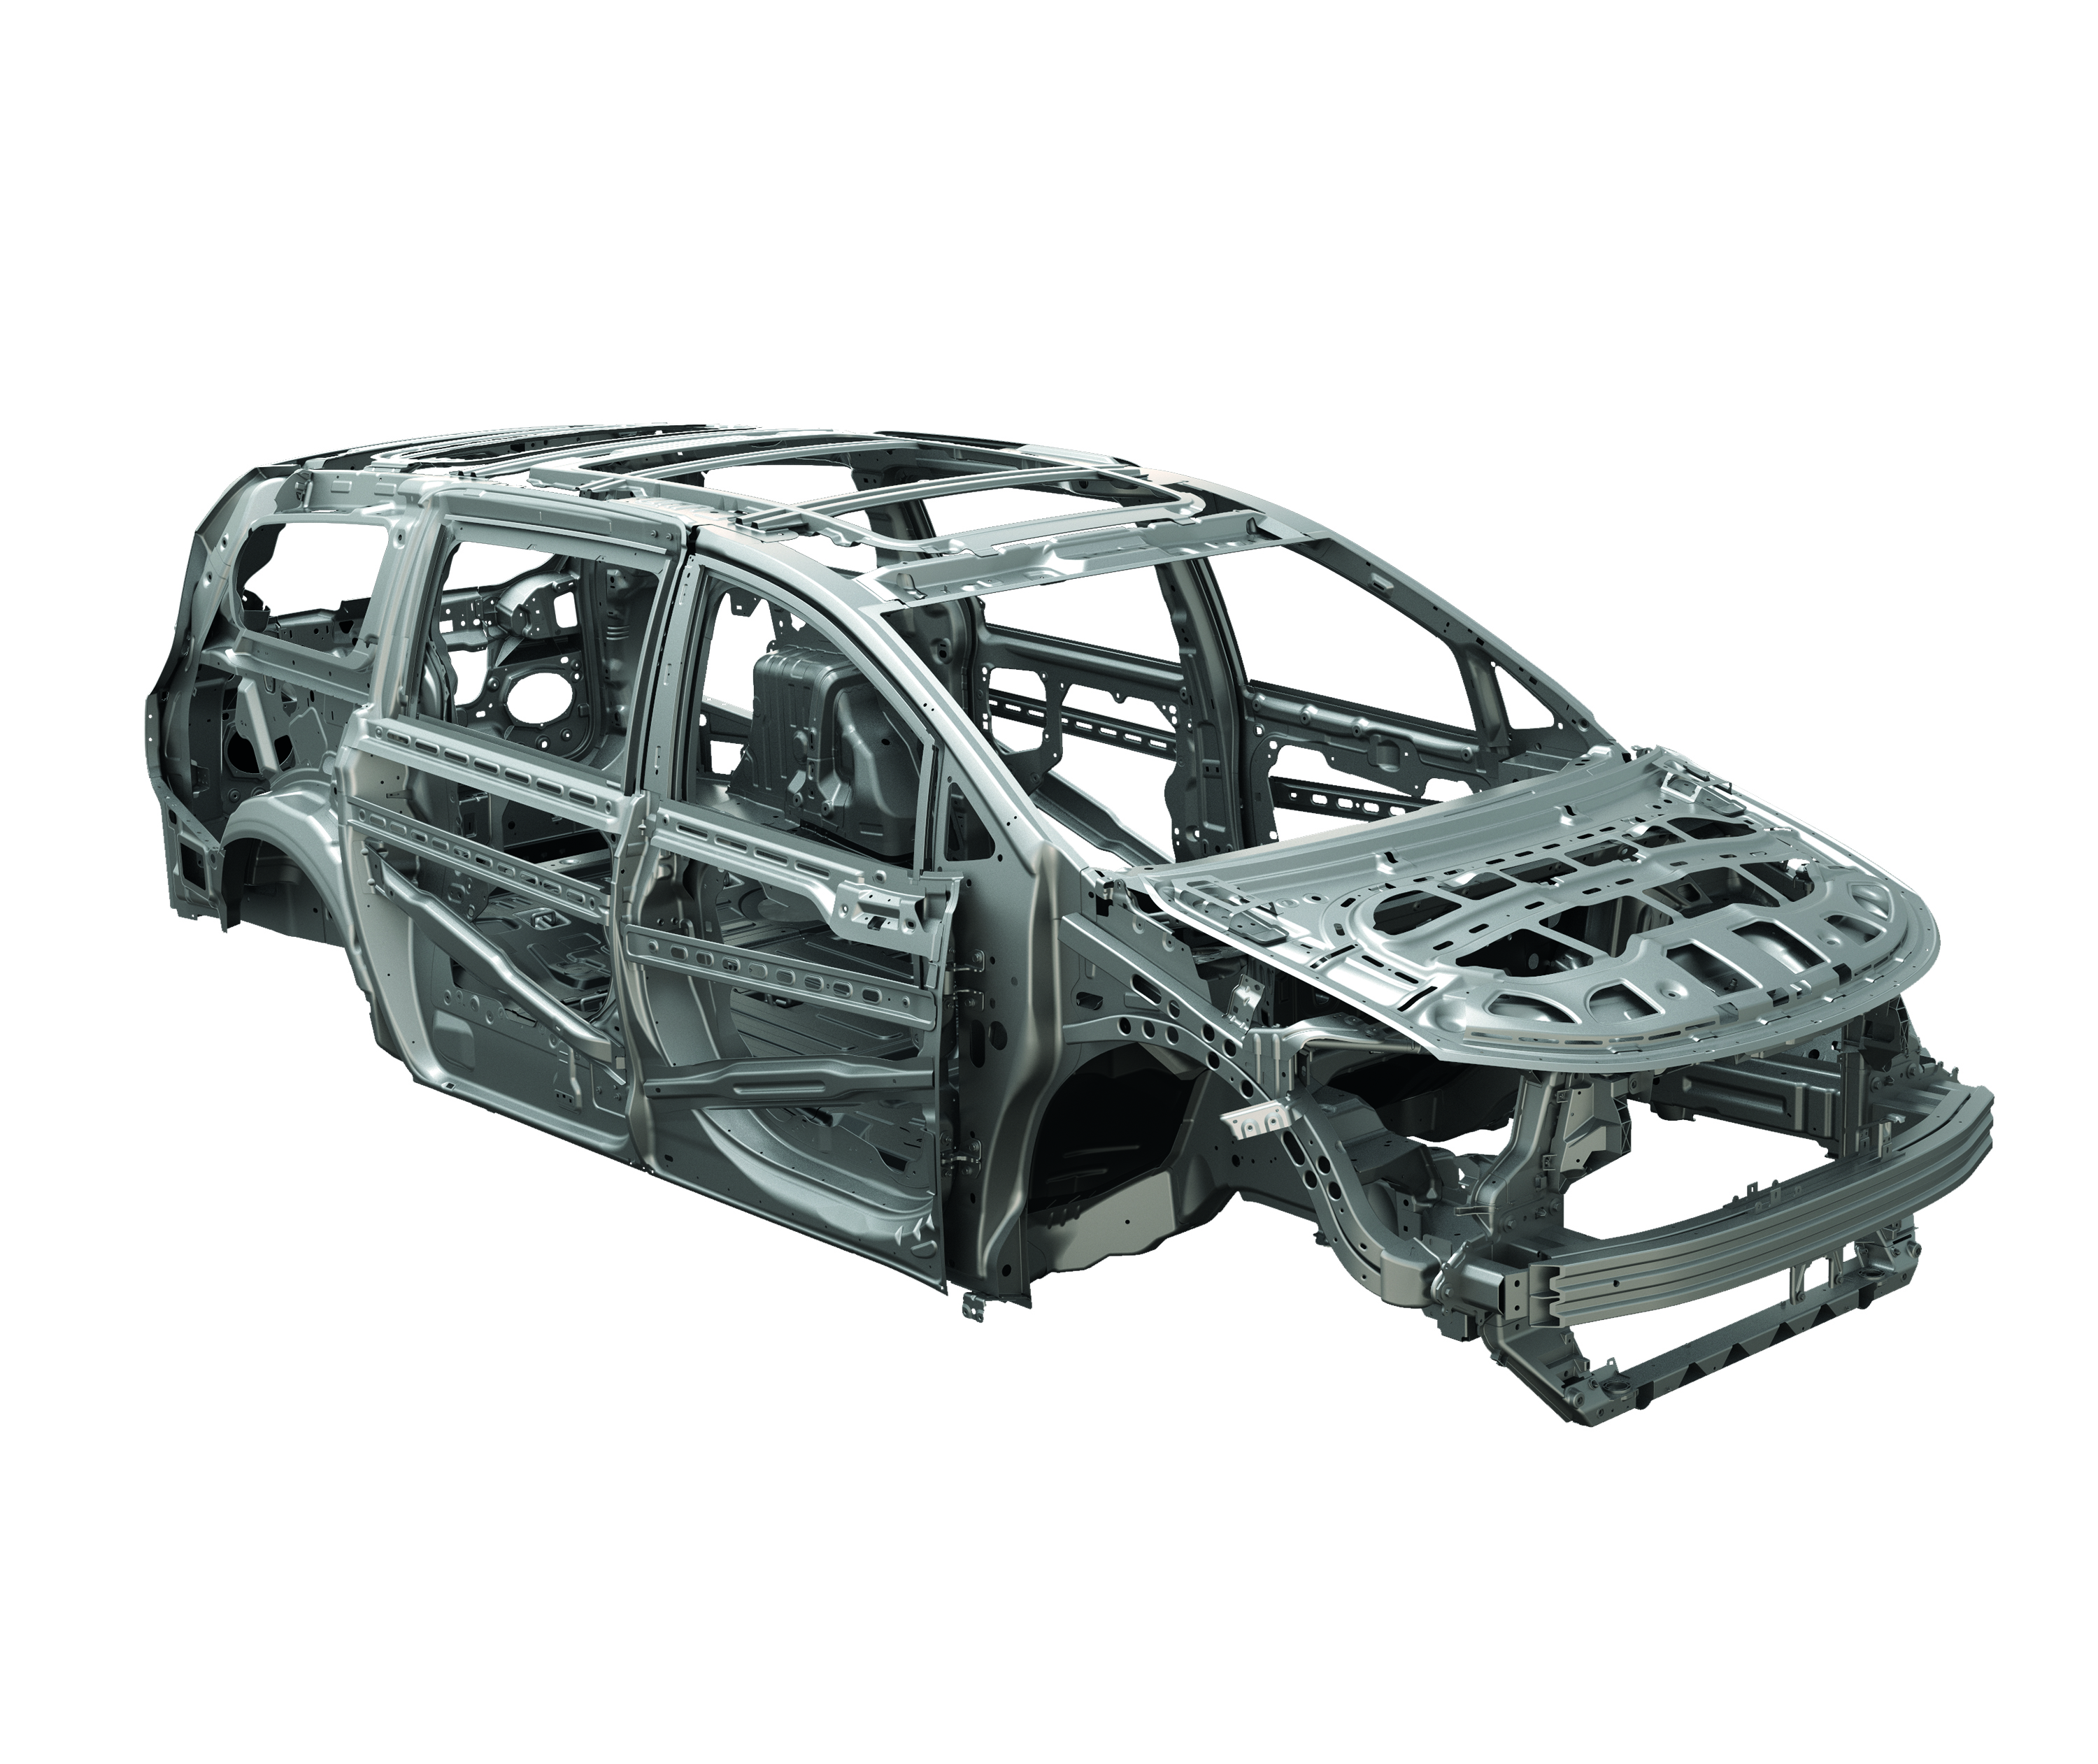 Higher-strength steels in the 2017 Chrysler Pacifica’s body structure account for most of its weight reduction.